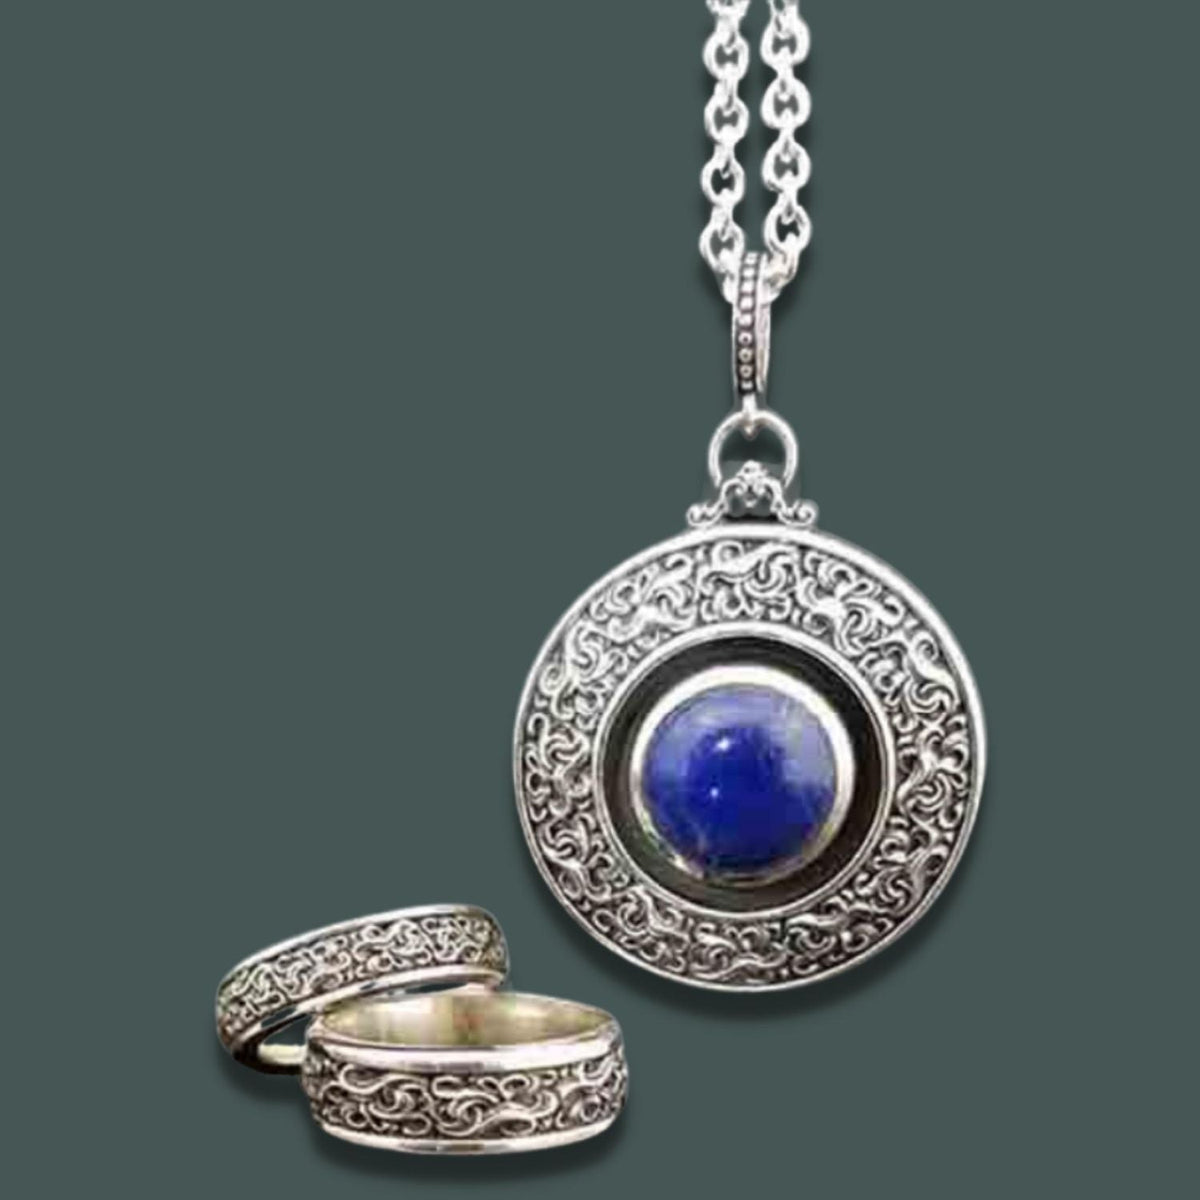 CASCADE Pendant with LAPIS - Starting at $249 - Celtic Jewelscapes